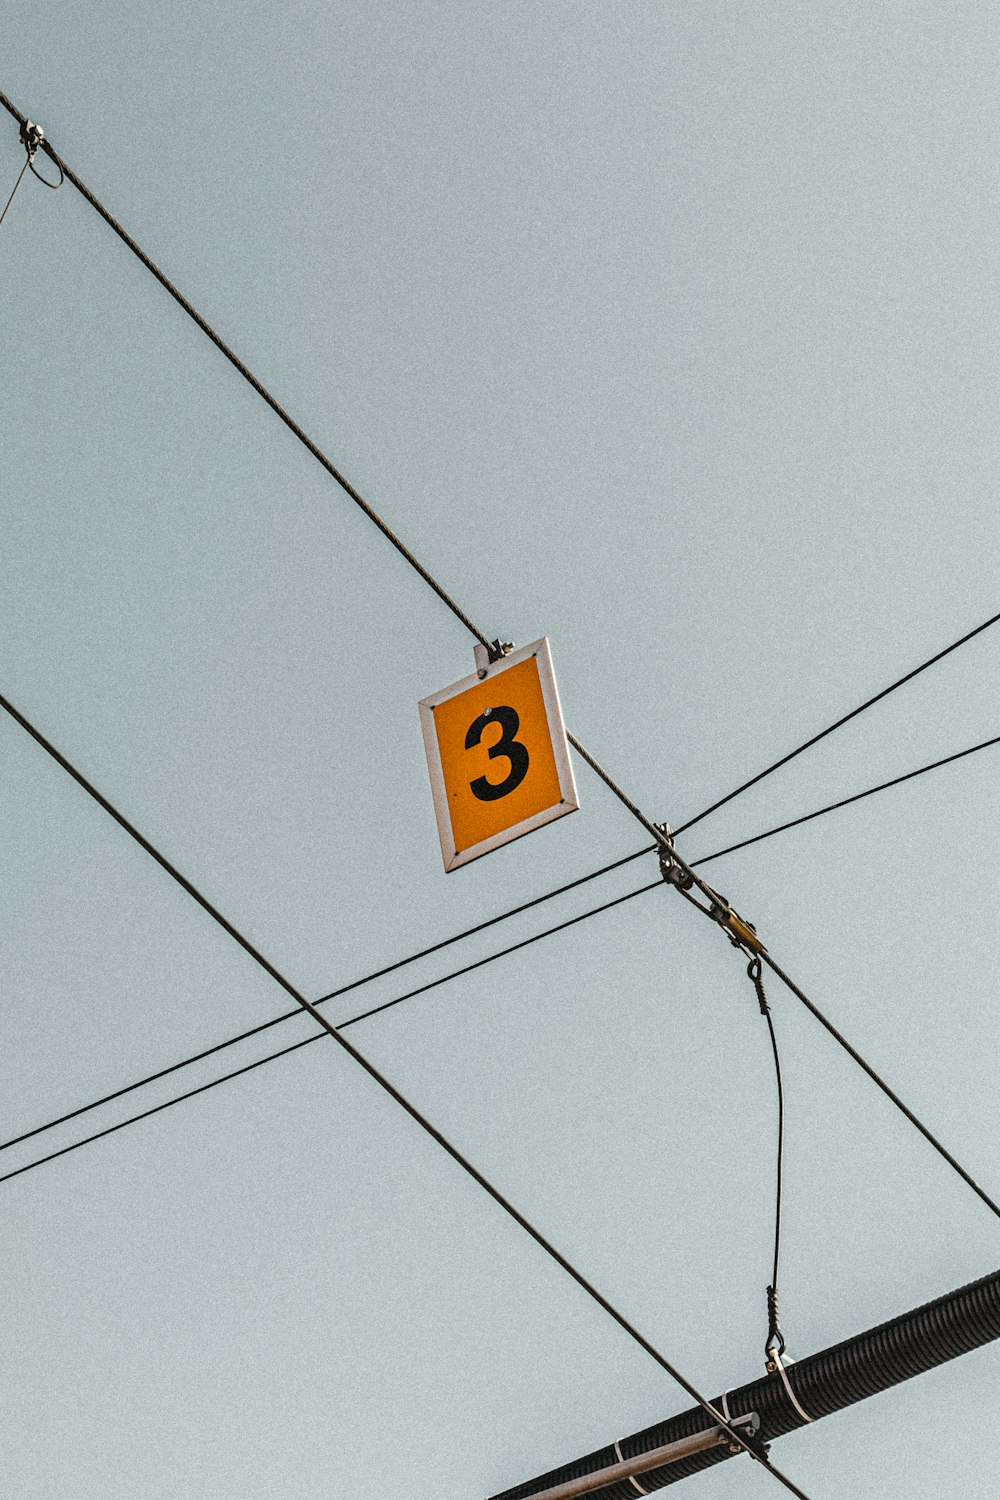 yellow 3 signboard hanging from cable